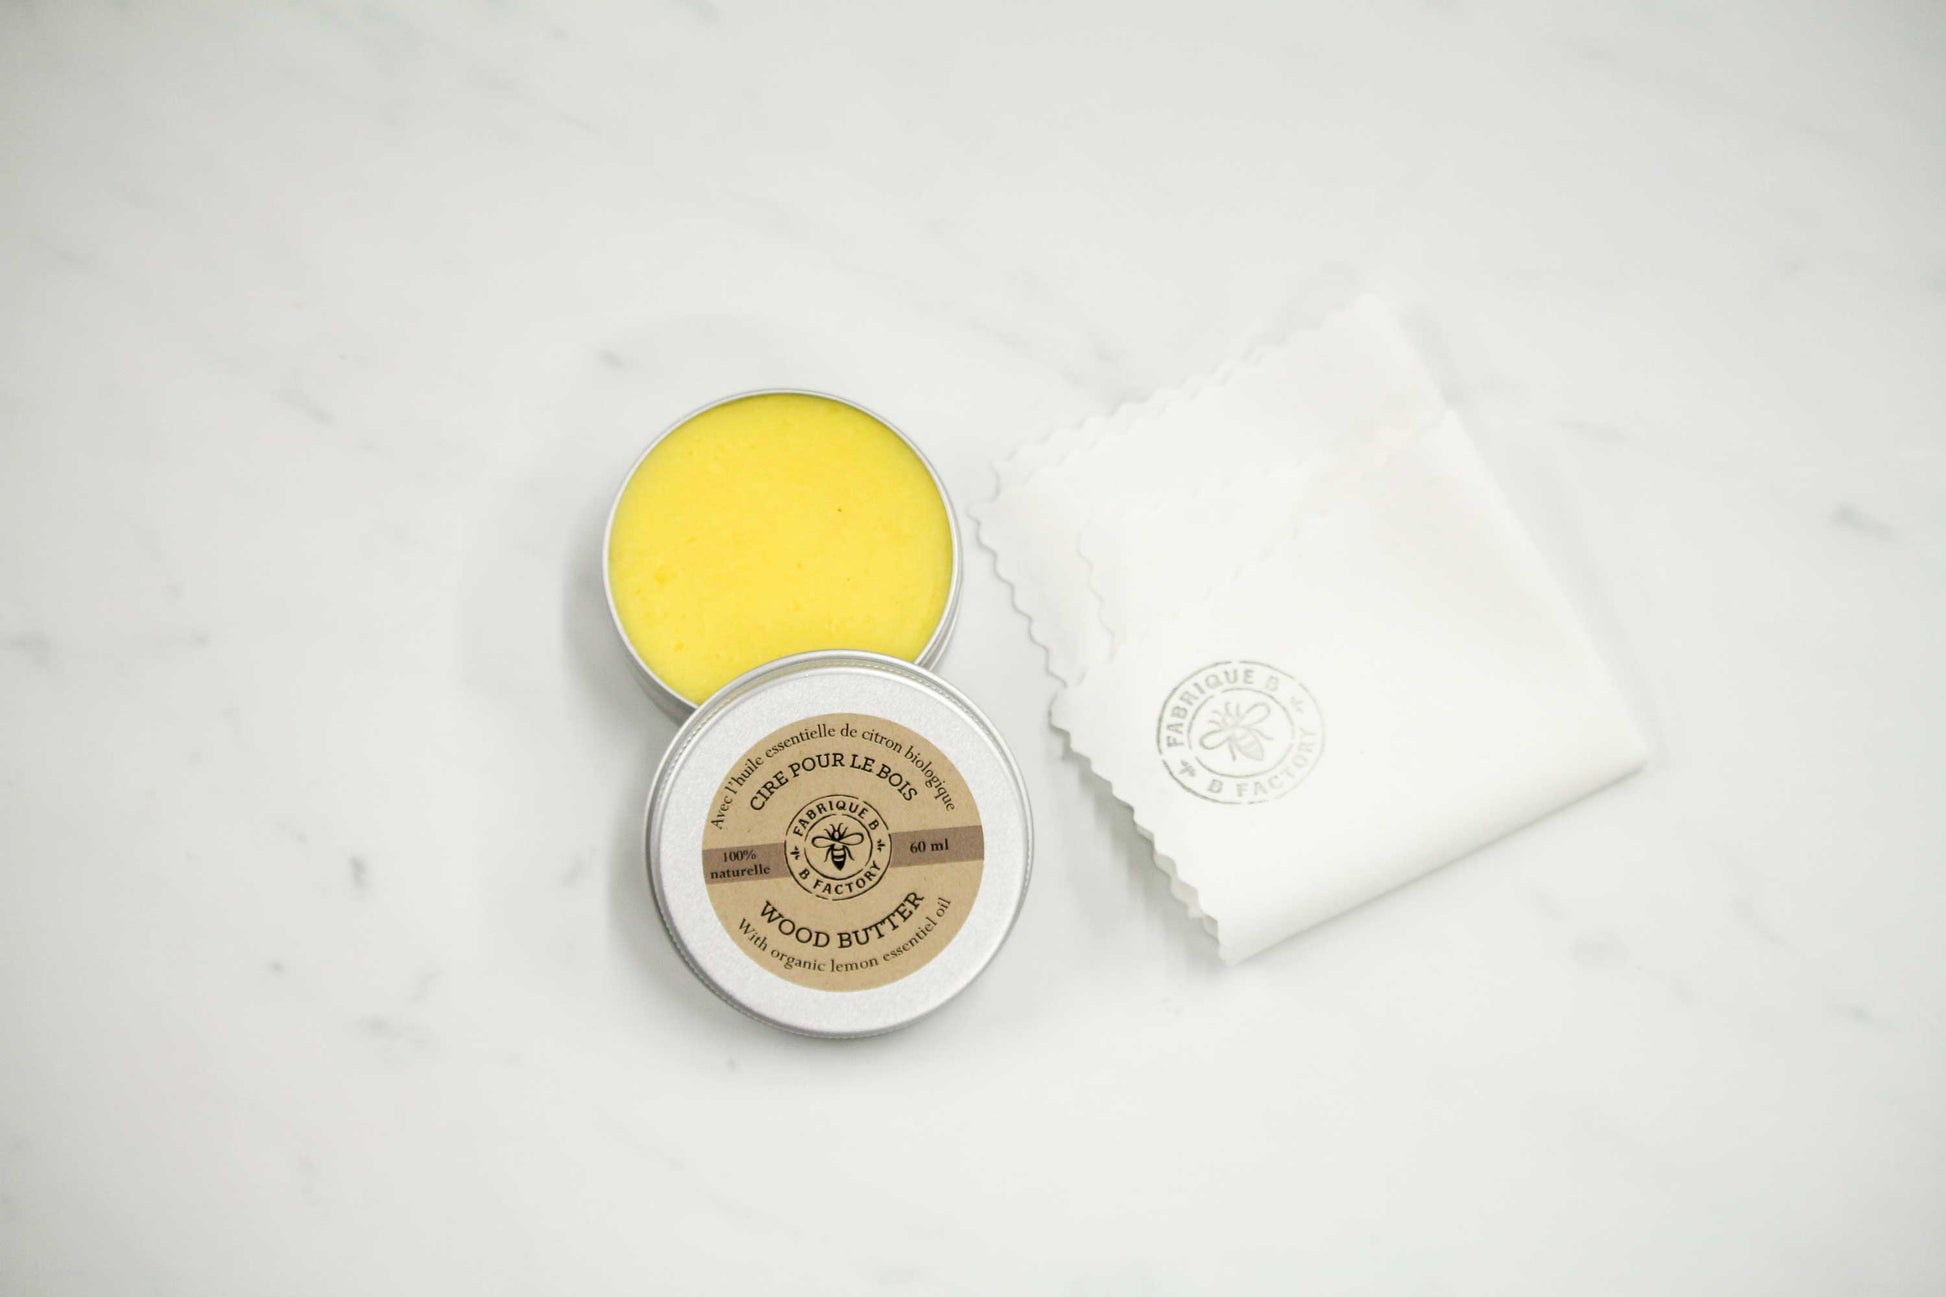 Natural beeswax wood butter in open silver tin with B Factory logo on lid next to white cloth